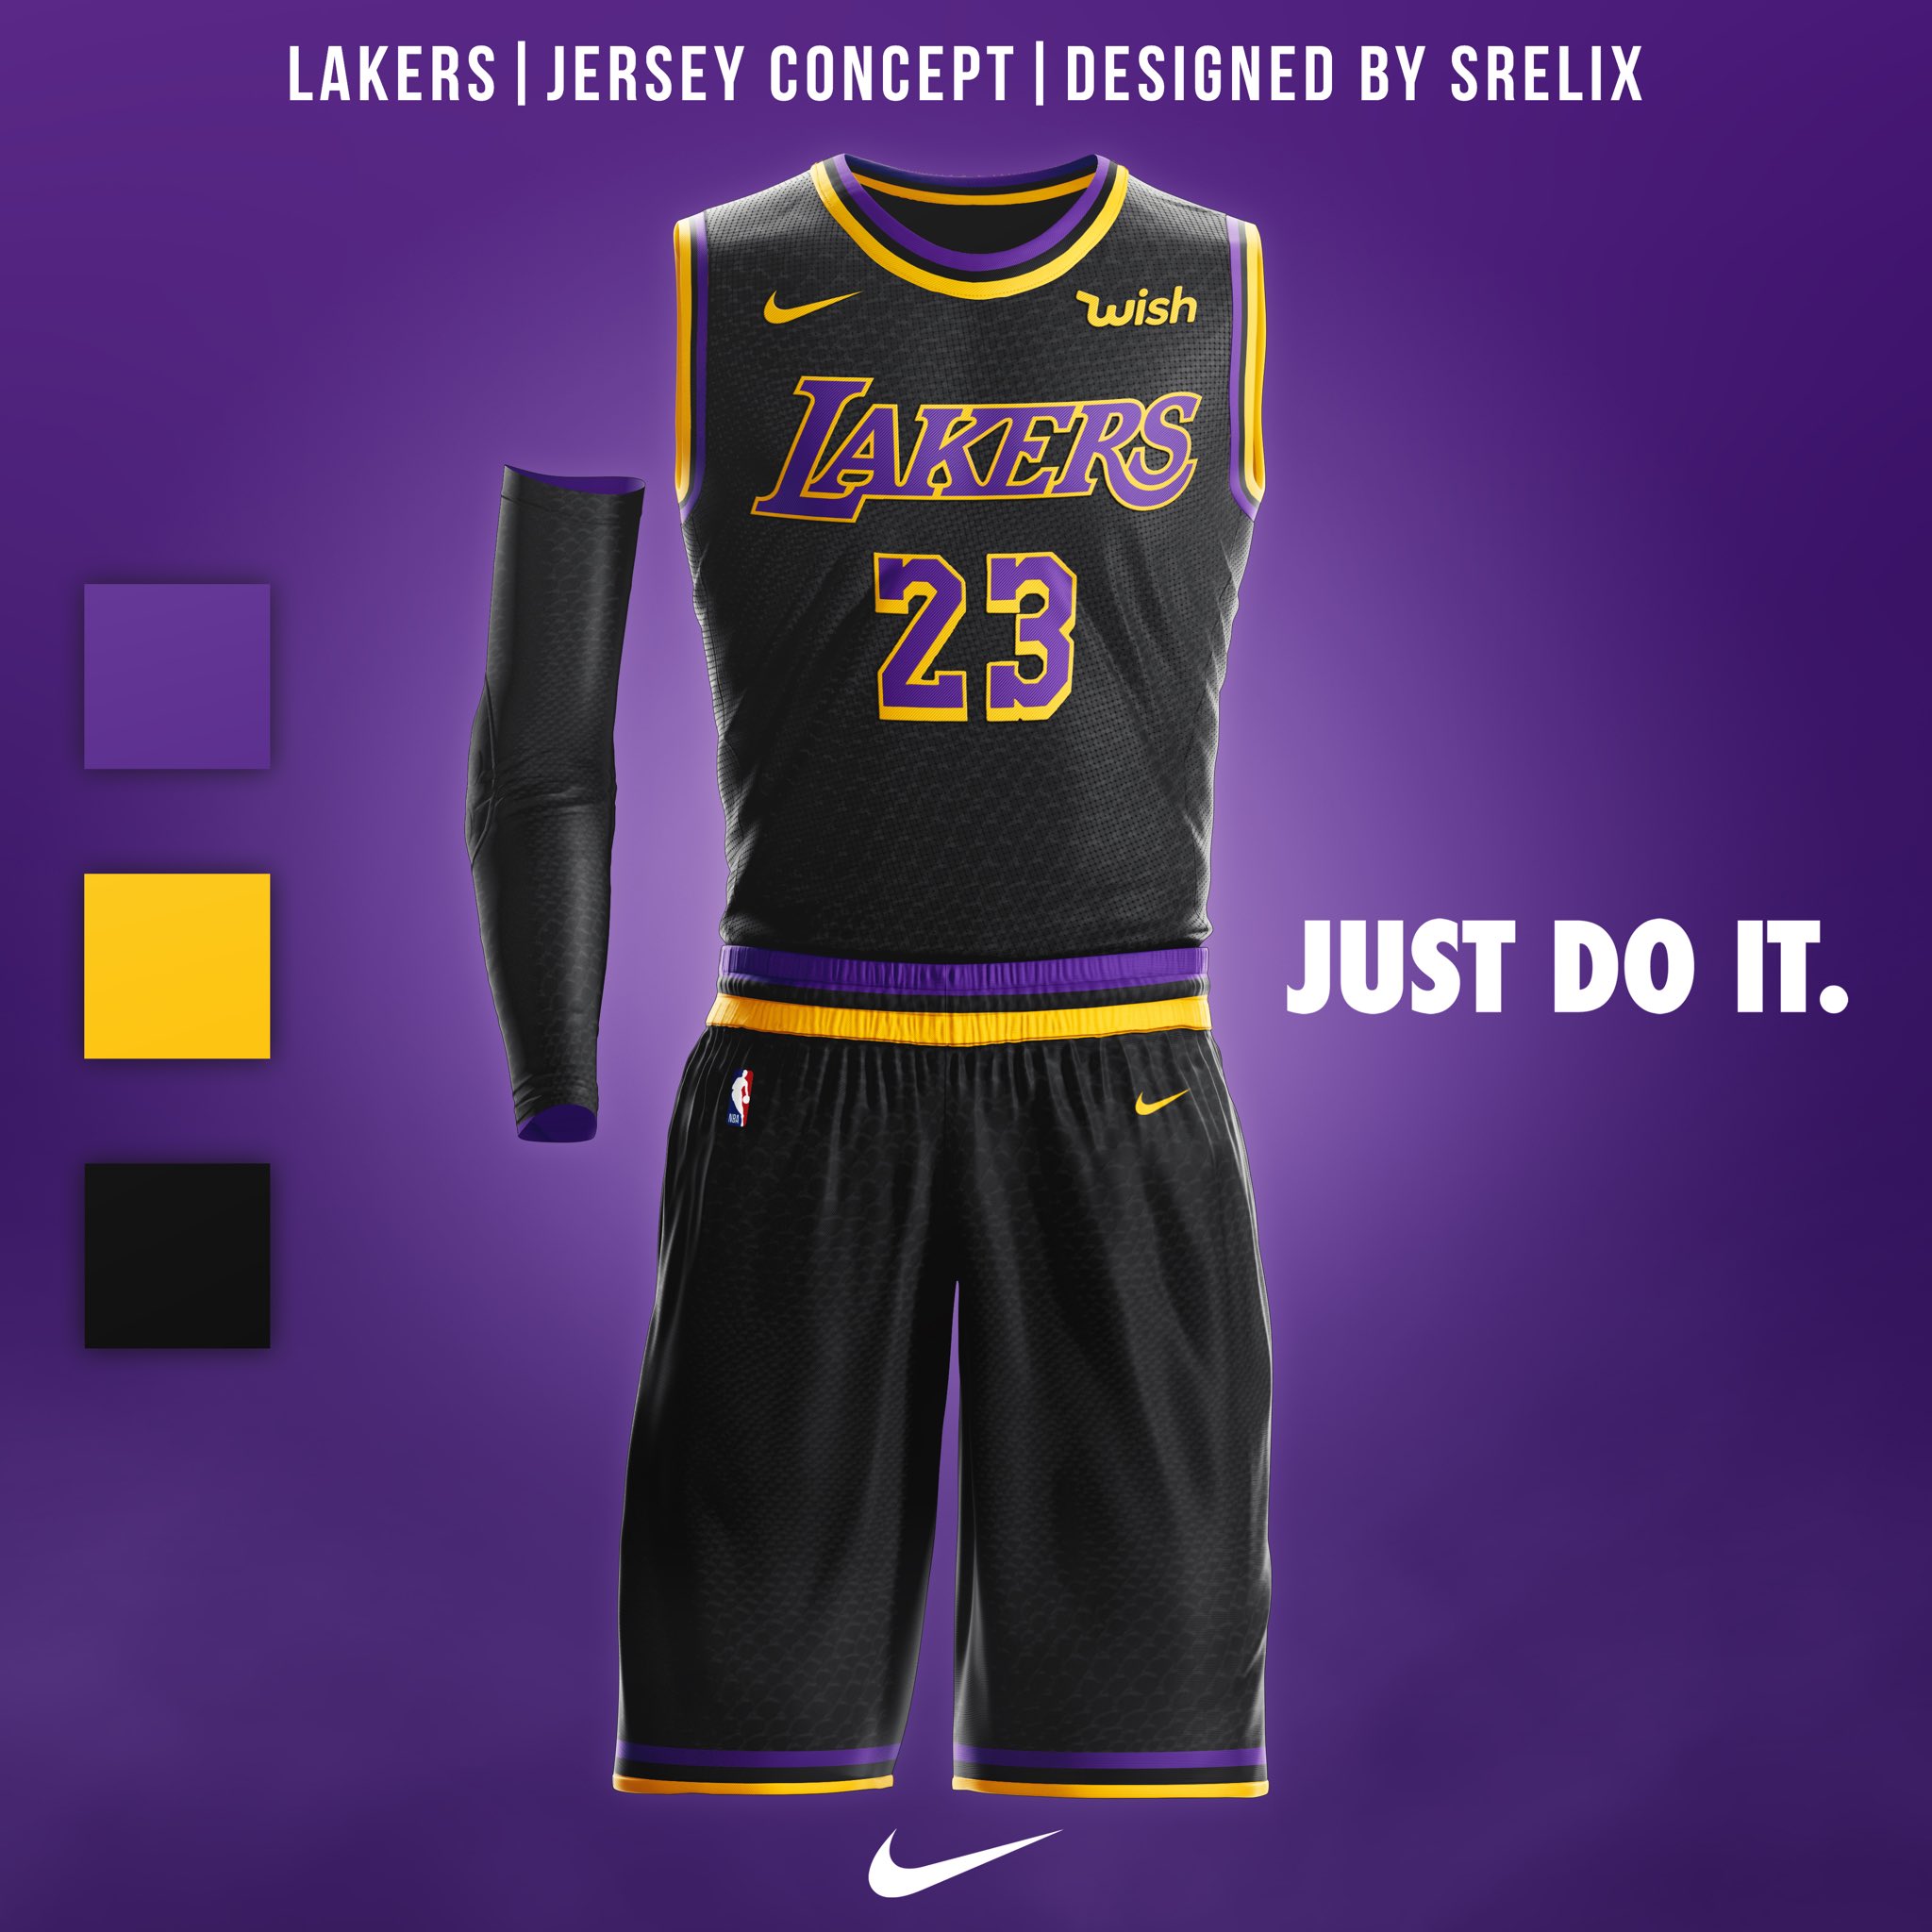 SRELIX Jerseys on Instagram: Los Angeles Lakers x Mickey Mouse